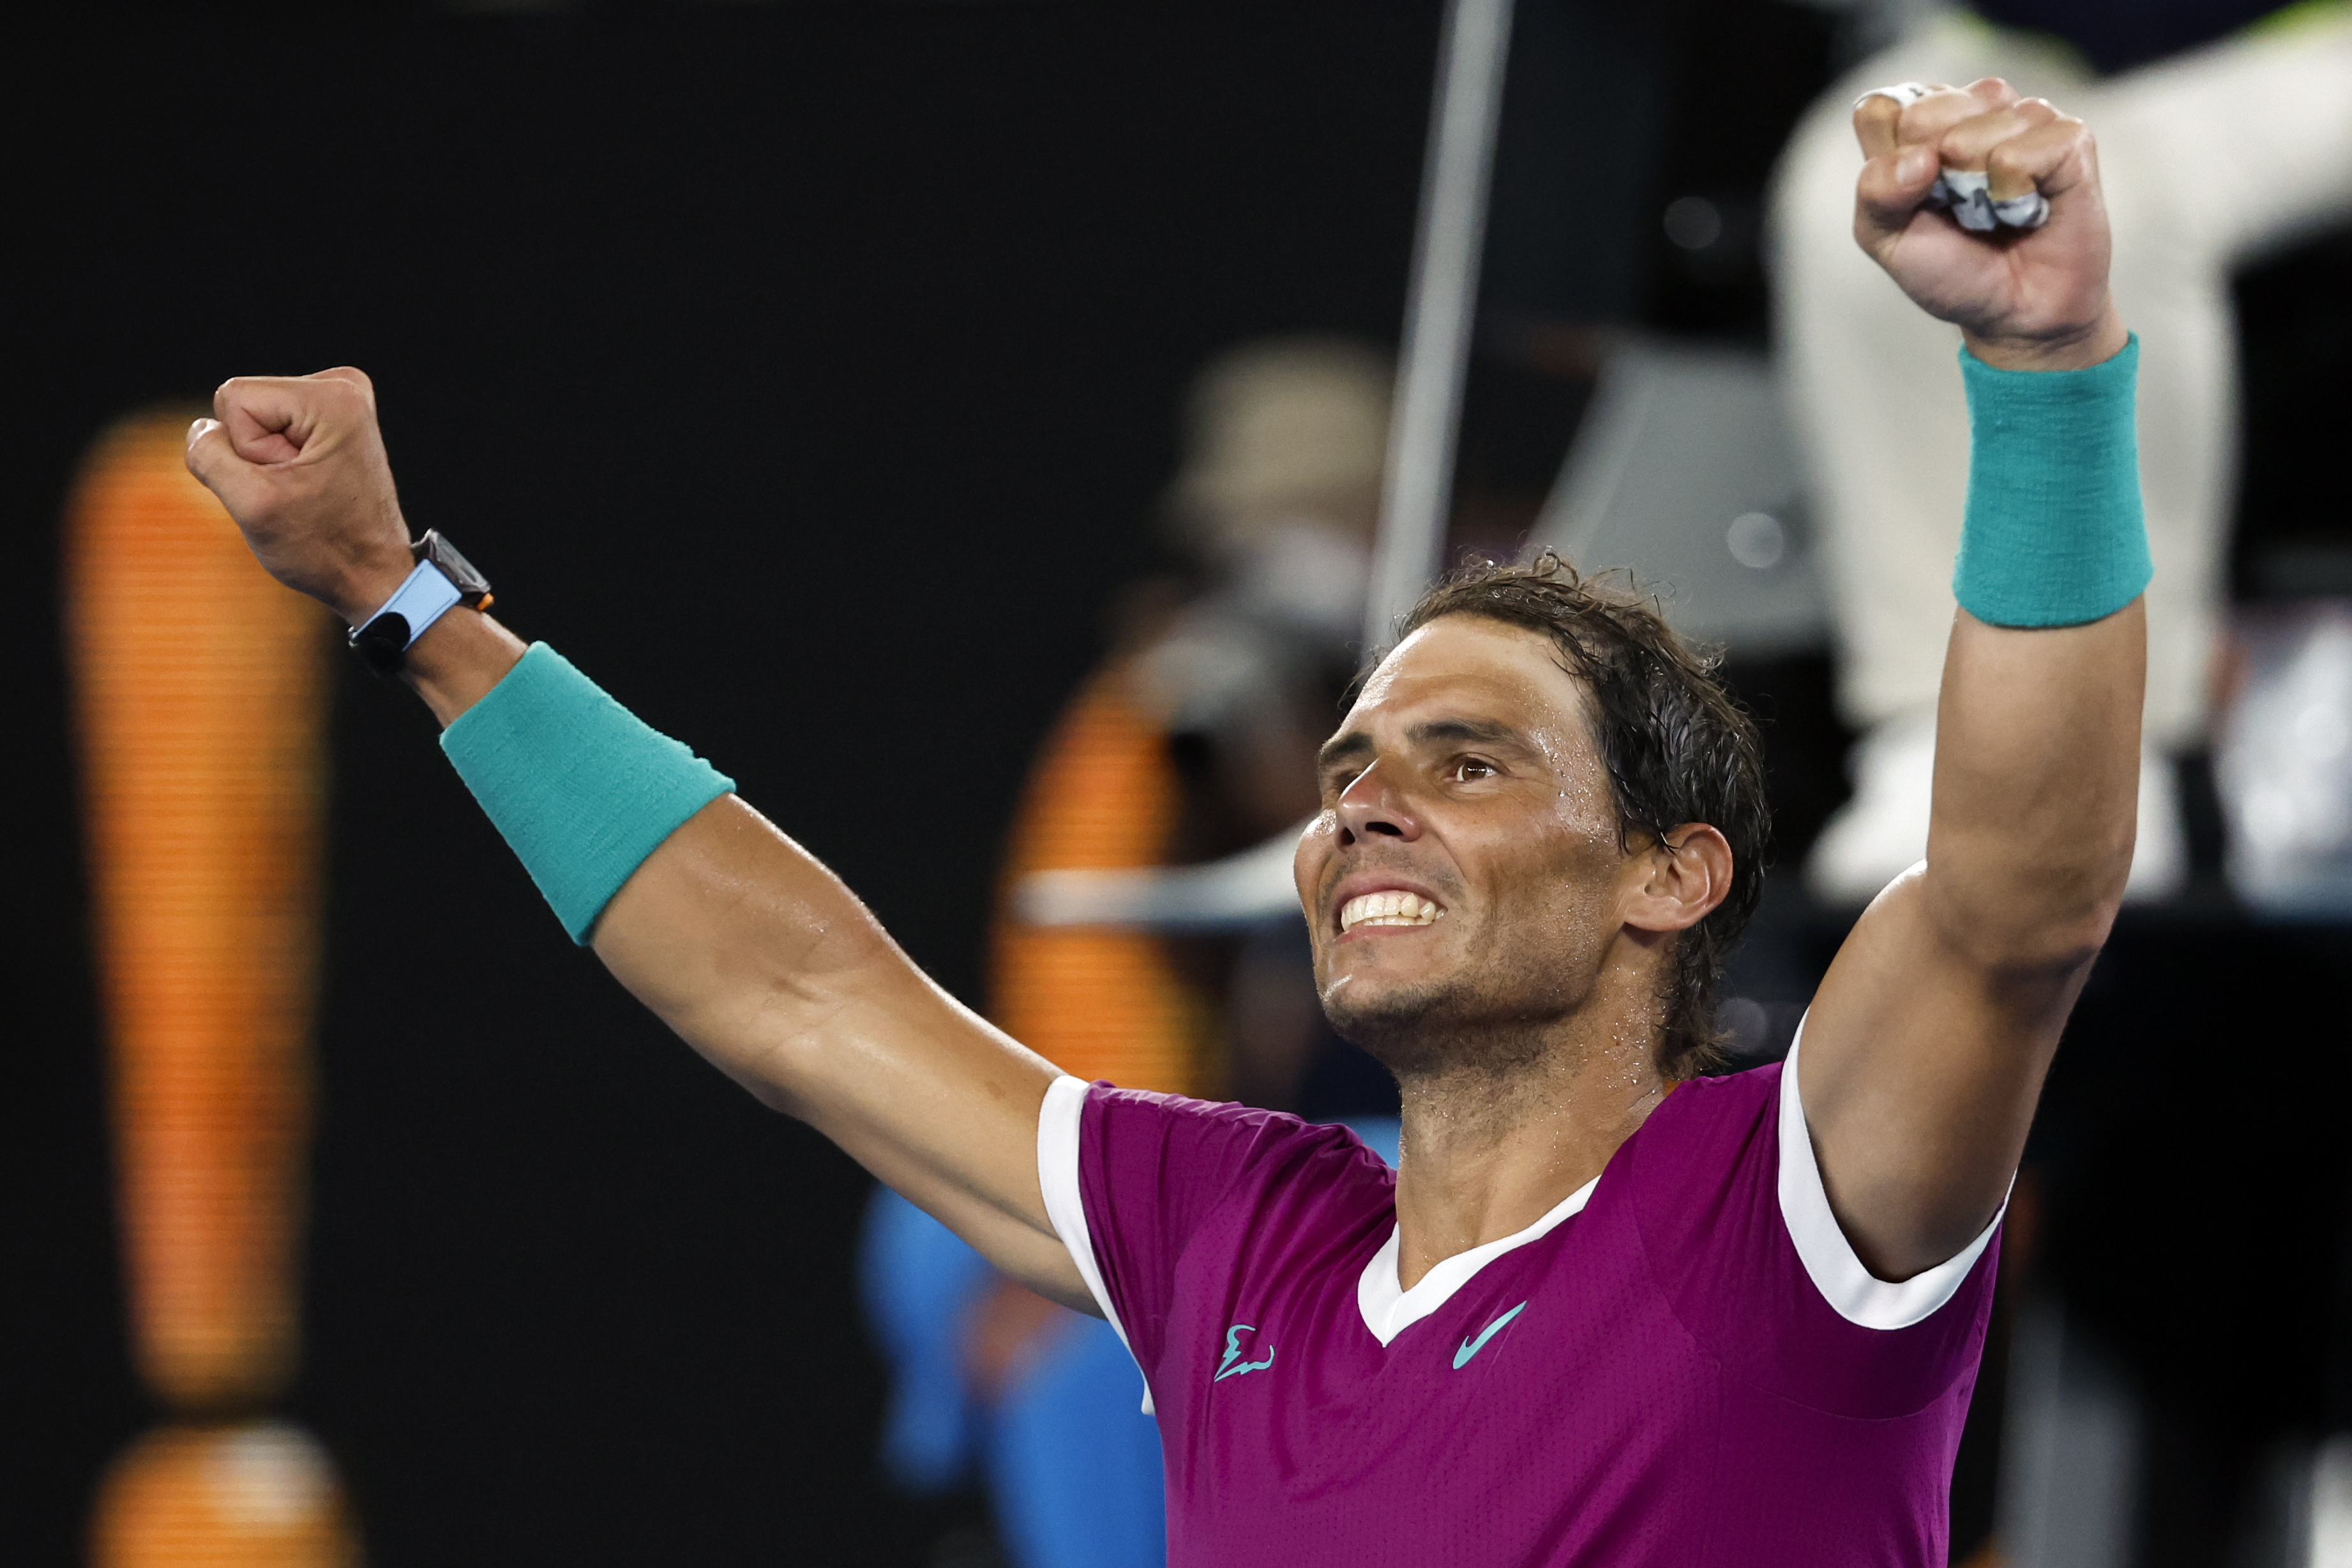 Australian Open mens finals live stream (1/30) How to watch Nadal, Medvedev online, TV, time